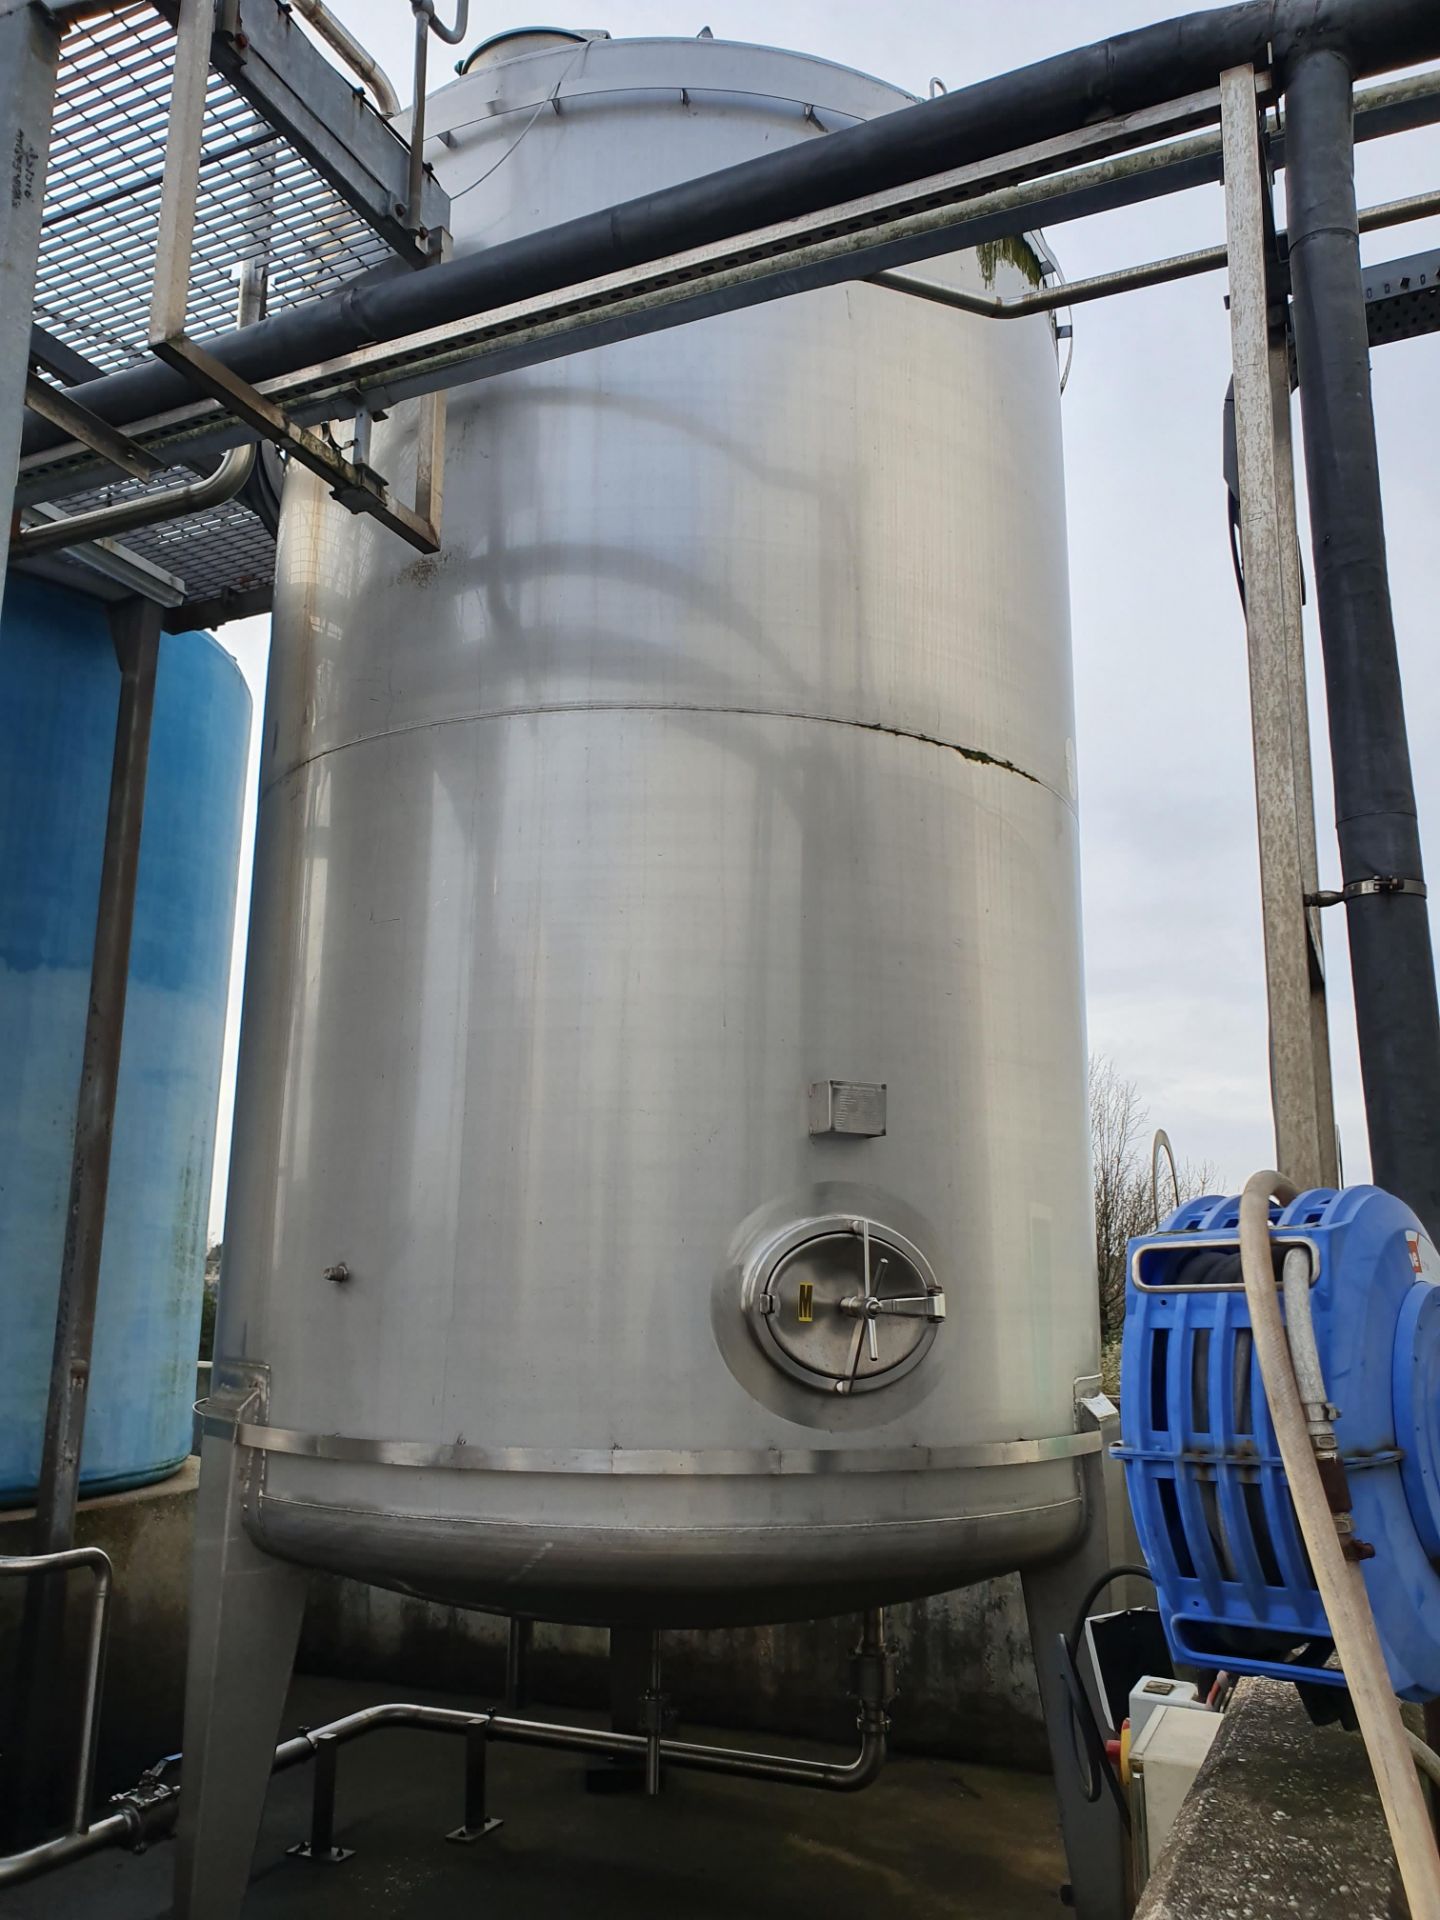 25 tonne 316 stainless steel vertical cylindrical